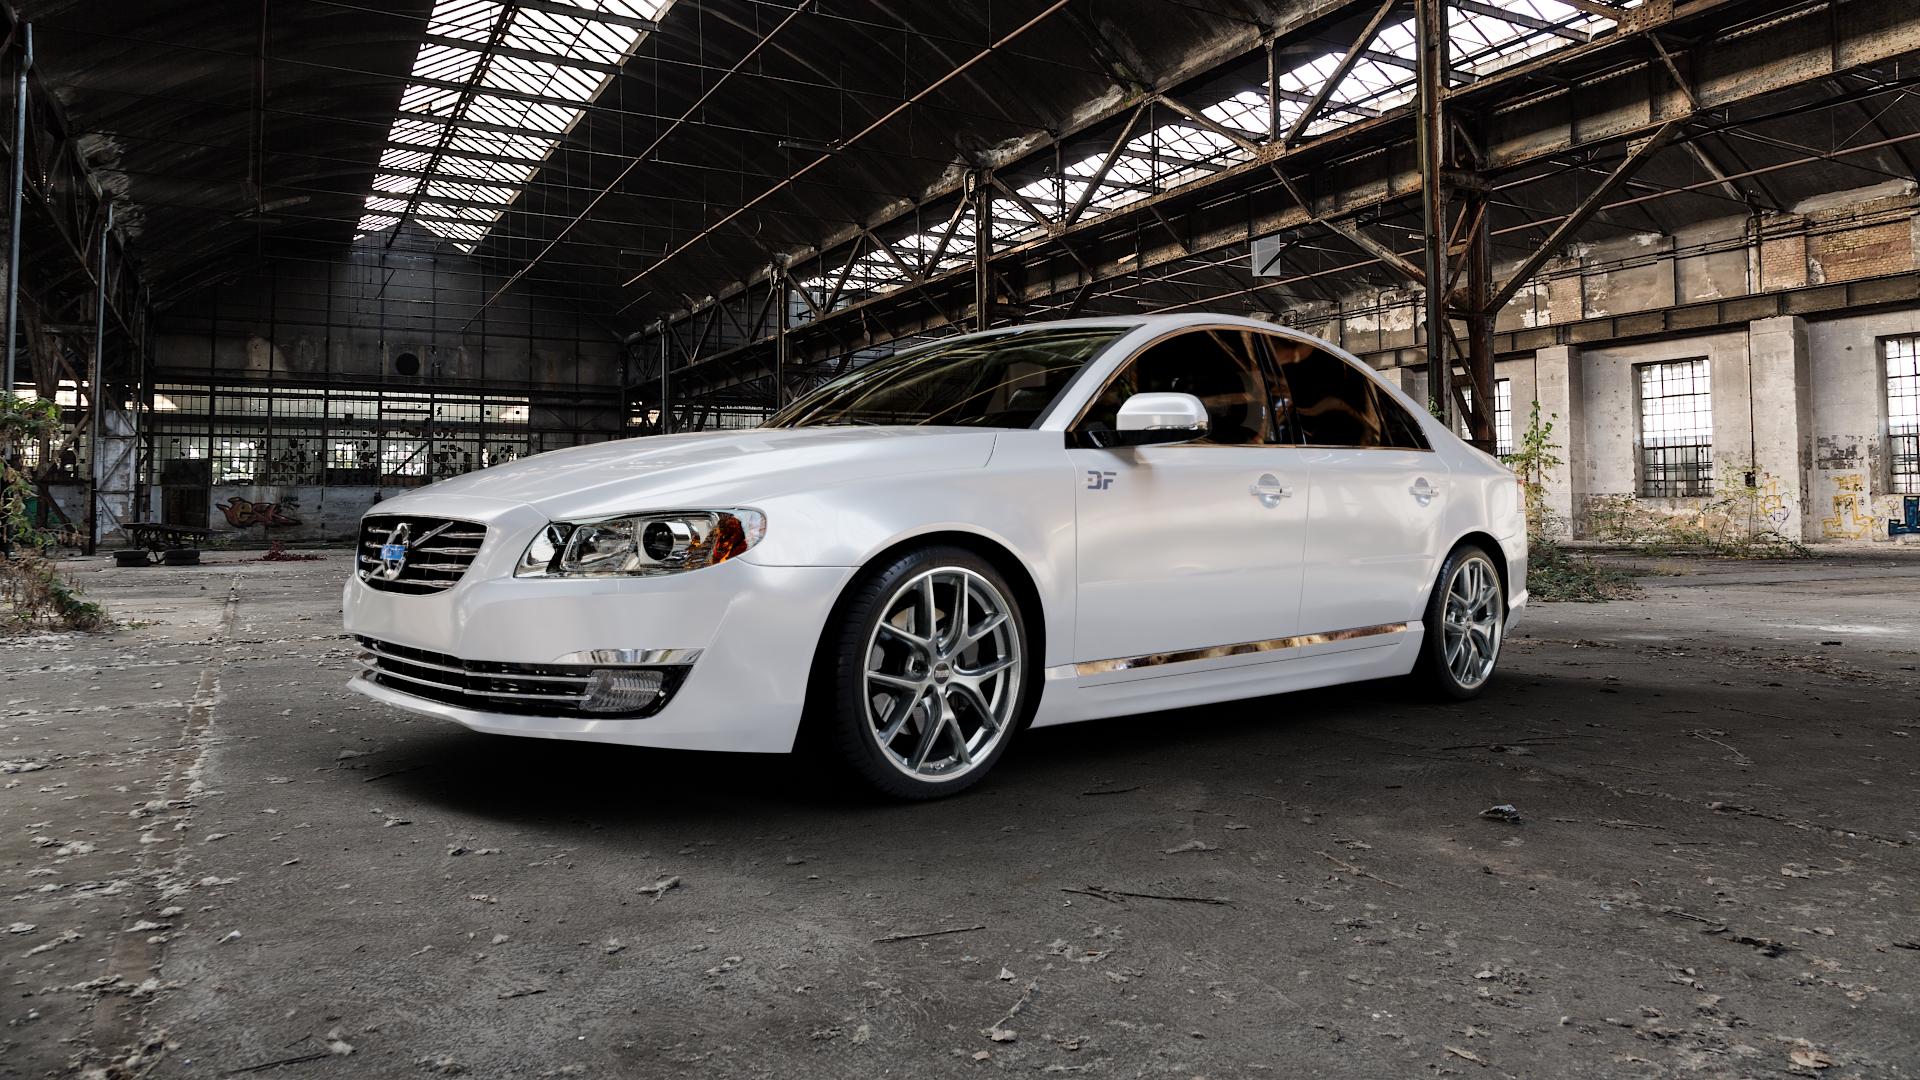 Volvo S80 II Type A 4,4l AWD 232kW (315 hp) Wheels and Tyre Packages |  velonity.com